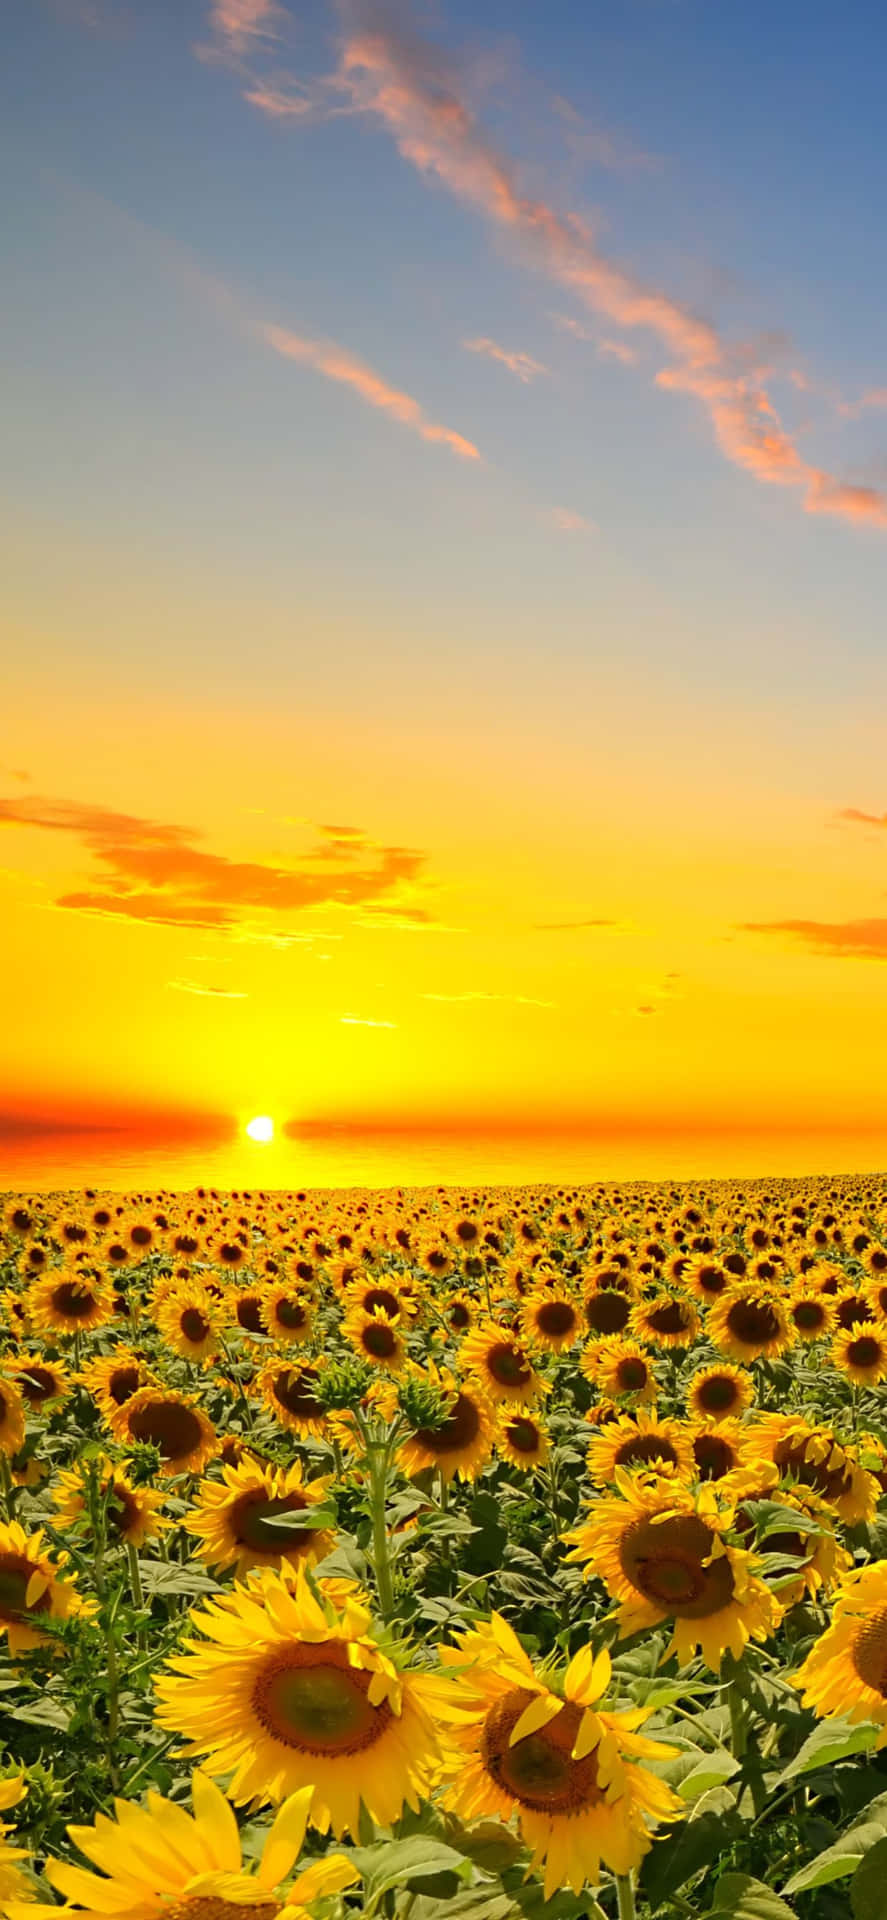 The True Beauty of Nature – A Field of Sunflowers